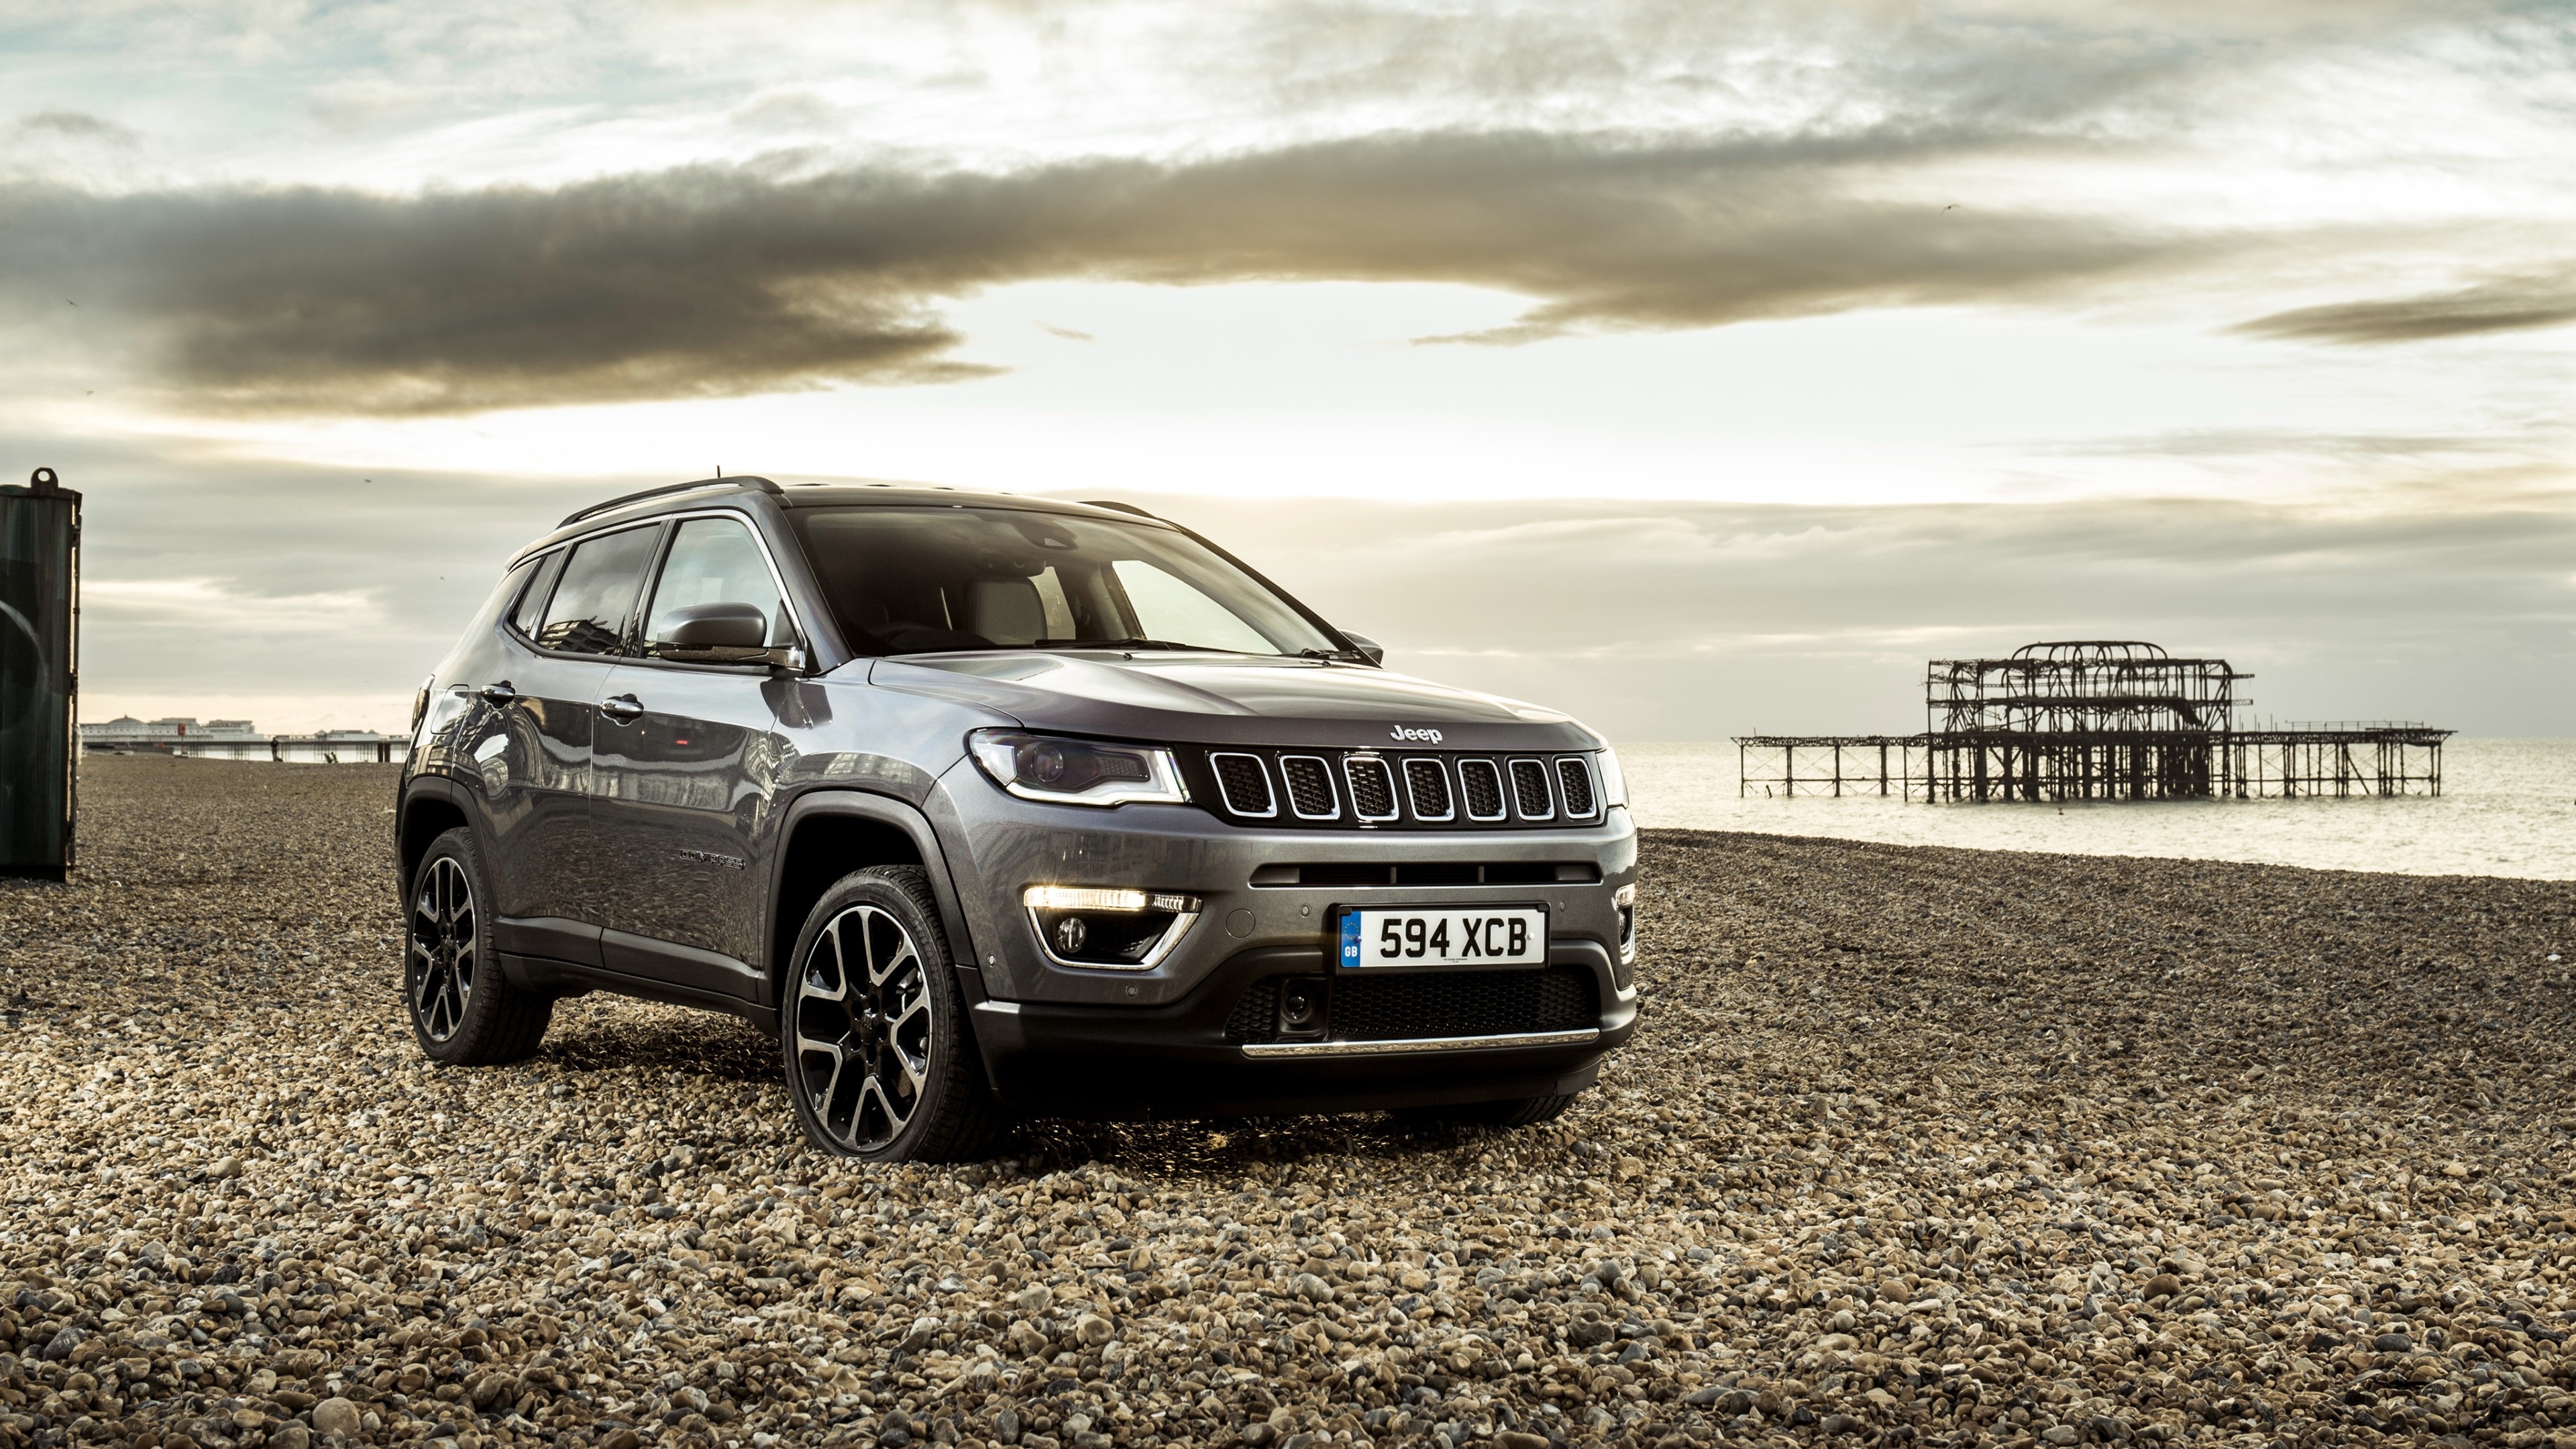 2018 Jeep Compass Limited Wallpaper | HD Car Wallpapers | ID #9135